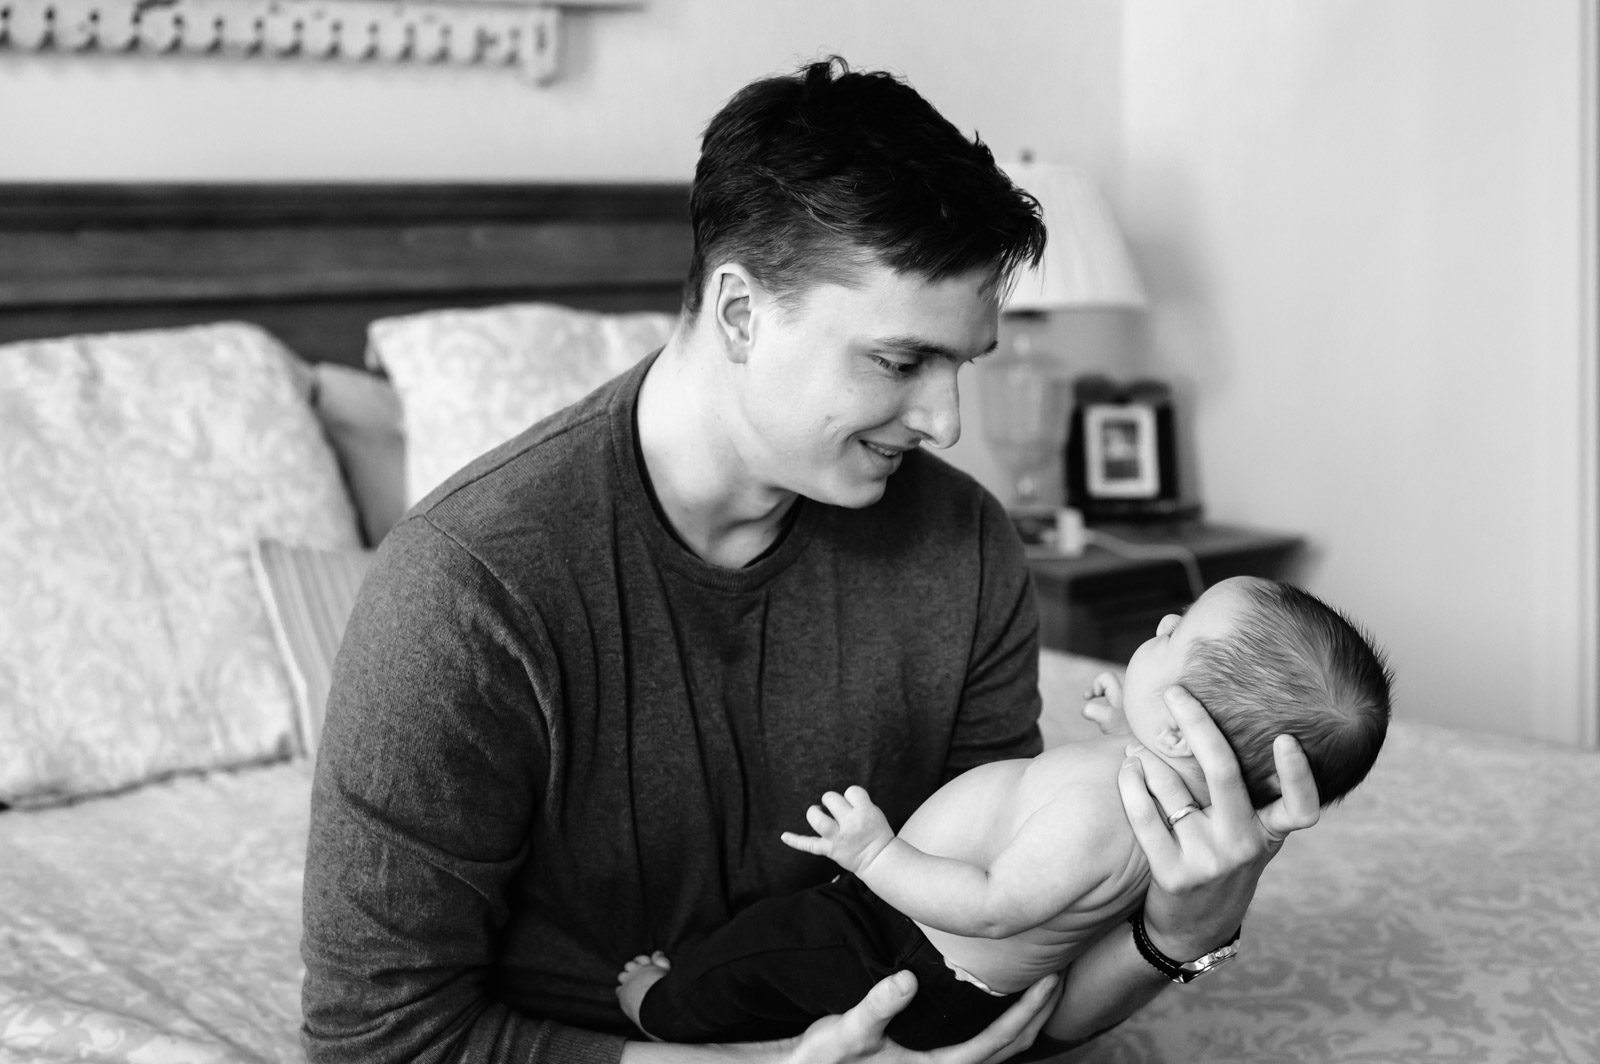 Black and white image of a dad sitting on his bed and smiling down at his newborn son in his arms during a natural newborn photoshoot